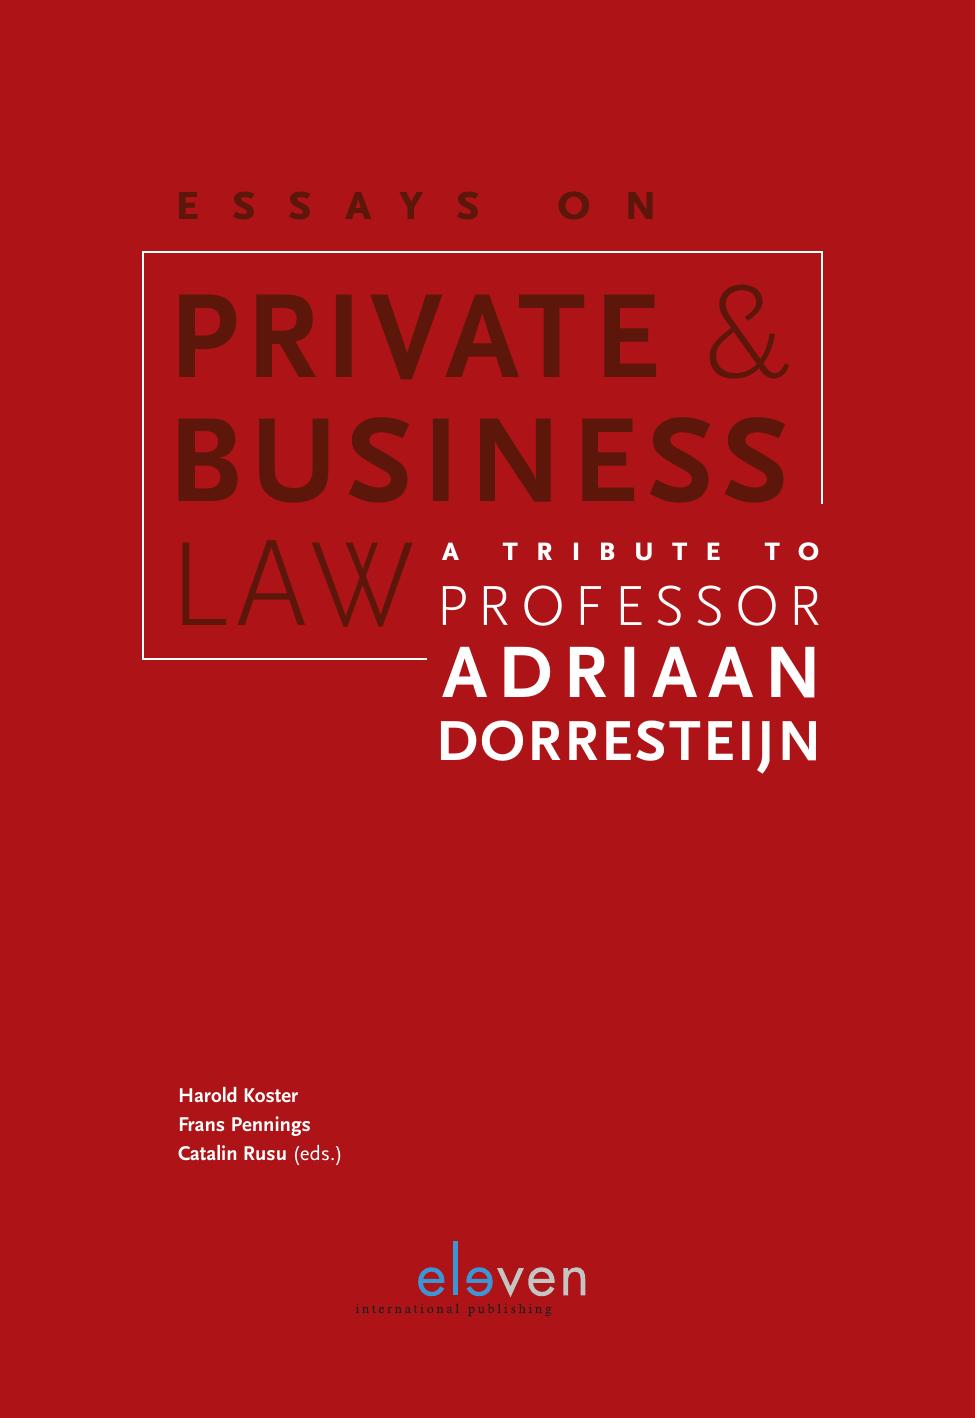 Essays on Private and Business Law : A Tribute to Professor Adriaan Dorresteijn by Harold Koster; Frans Pennings; Catalin Rusu